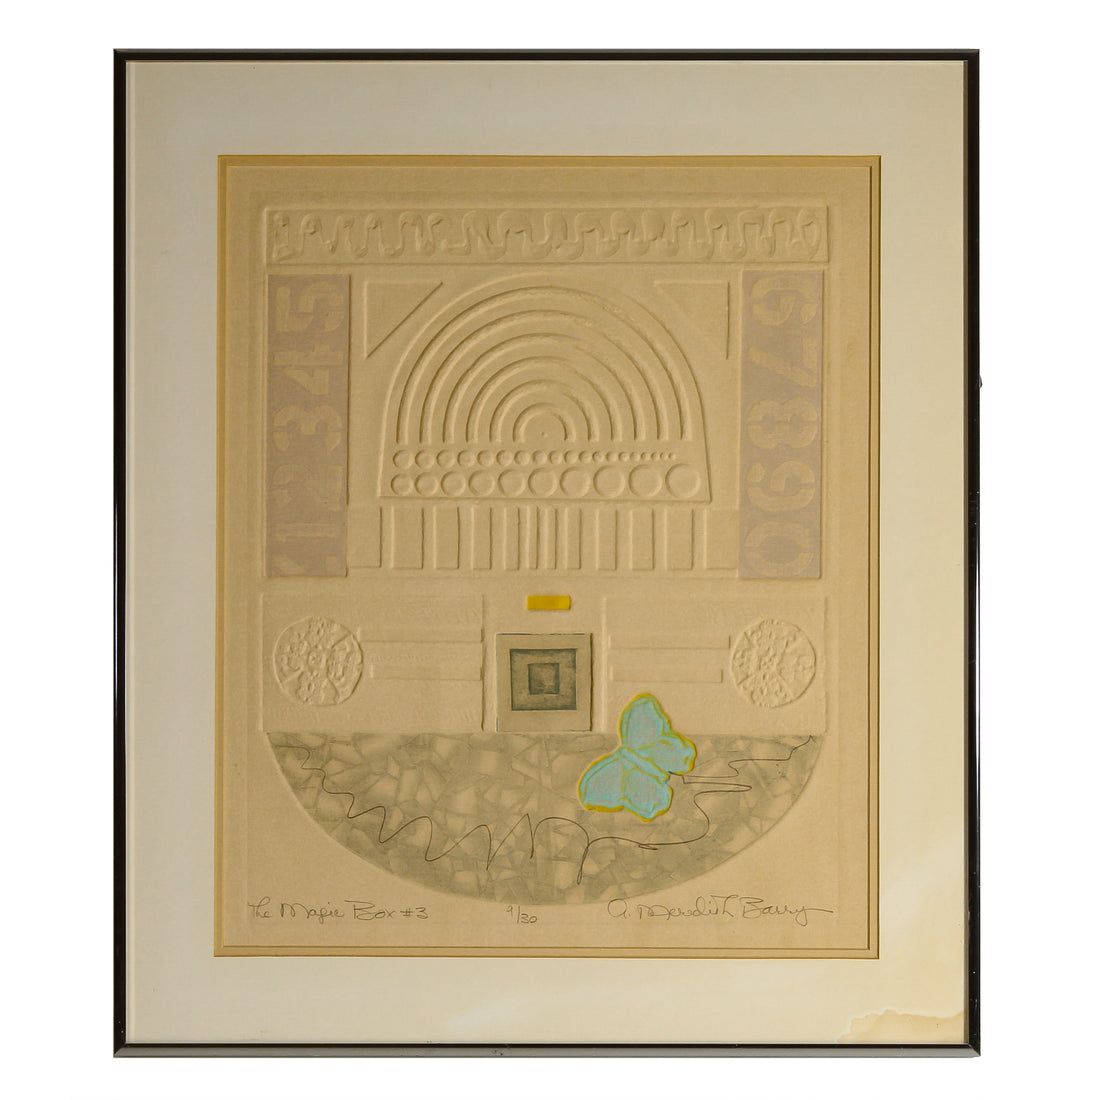 Anne Meredith Barry - "The Magic Box #3" - Lithograph on Embossed Paper